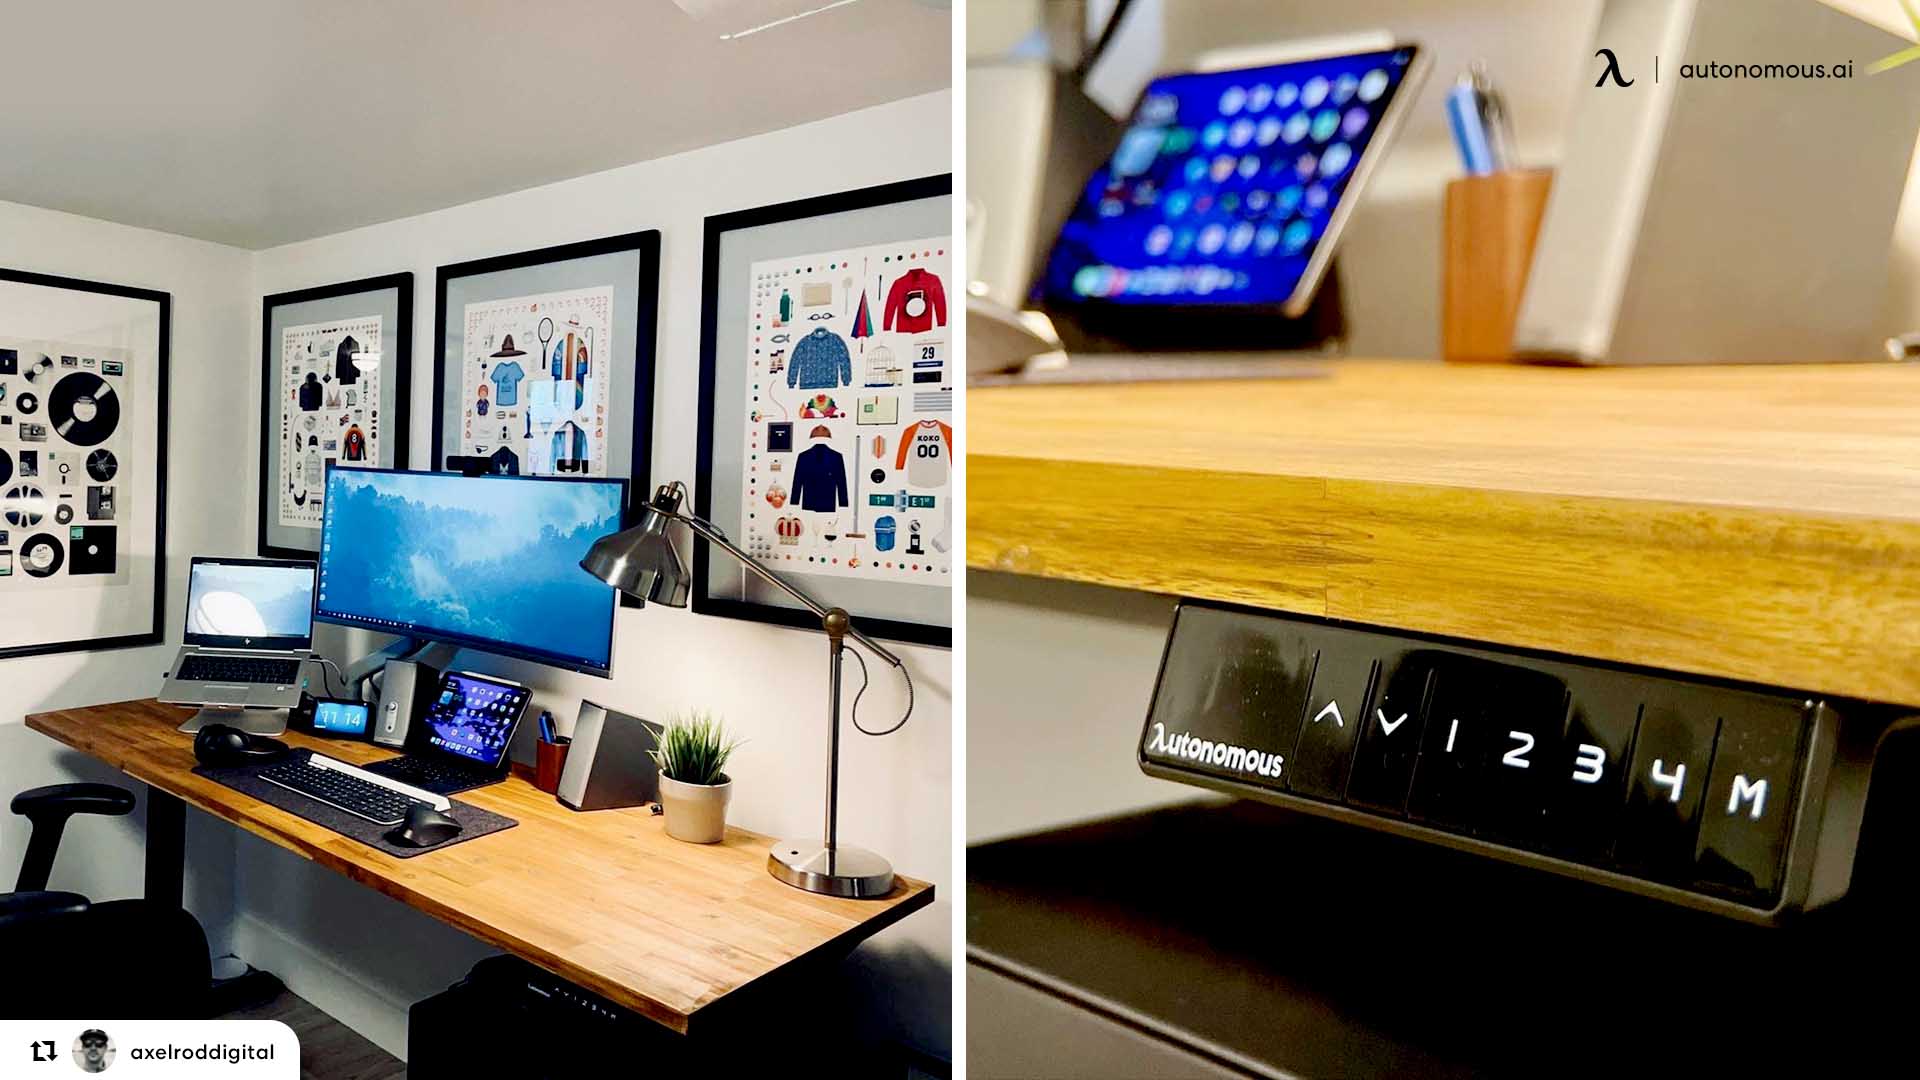 How Do You Choose the Best Desk for You?